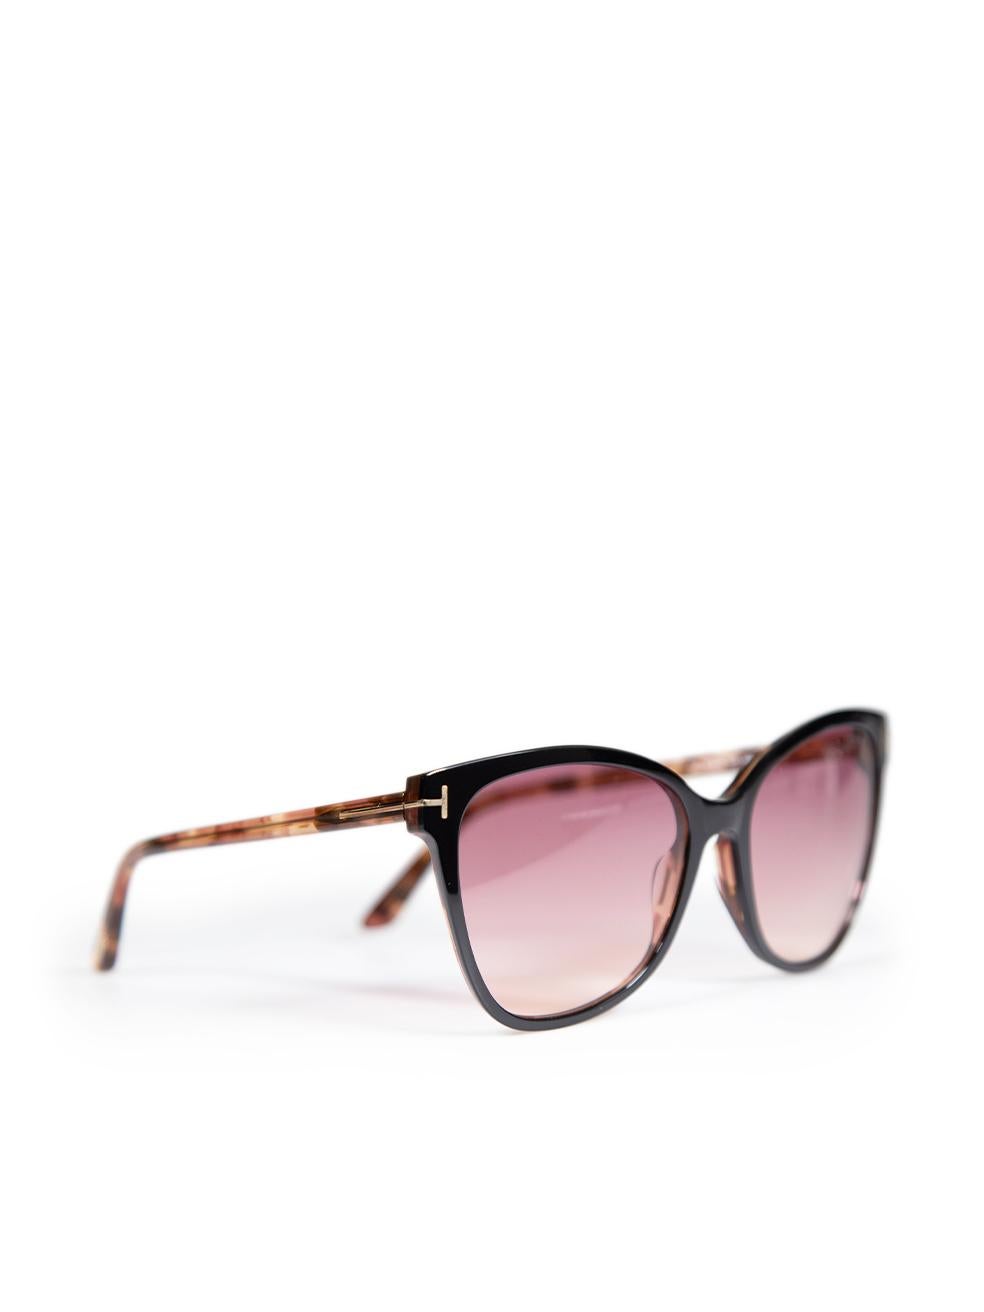 Tom Ford Ani Pink Gradient Cat Eye Sunglasses In New Condition For Sale In London, GB